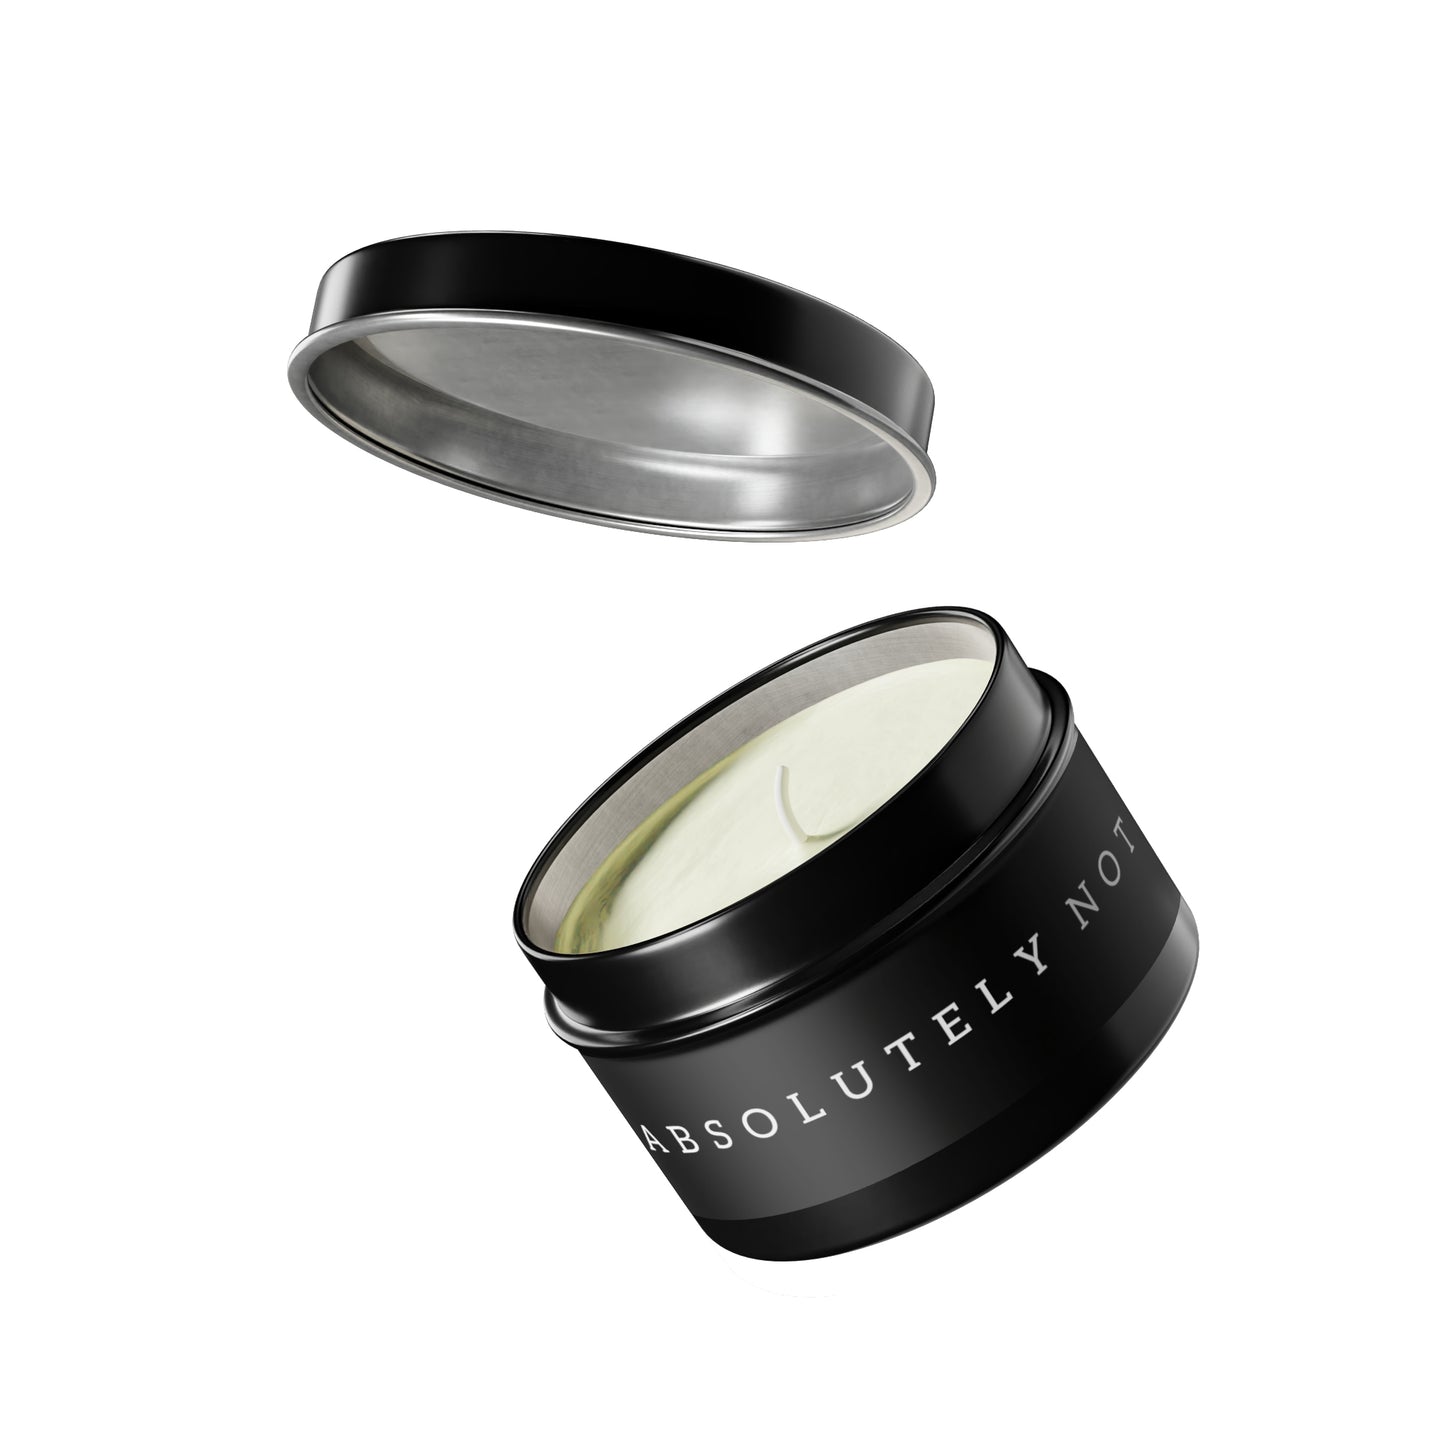 Absolutely Not Candle in Minimalist Black Steel Tin (2 sizes)